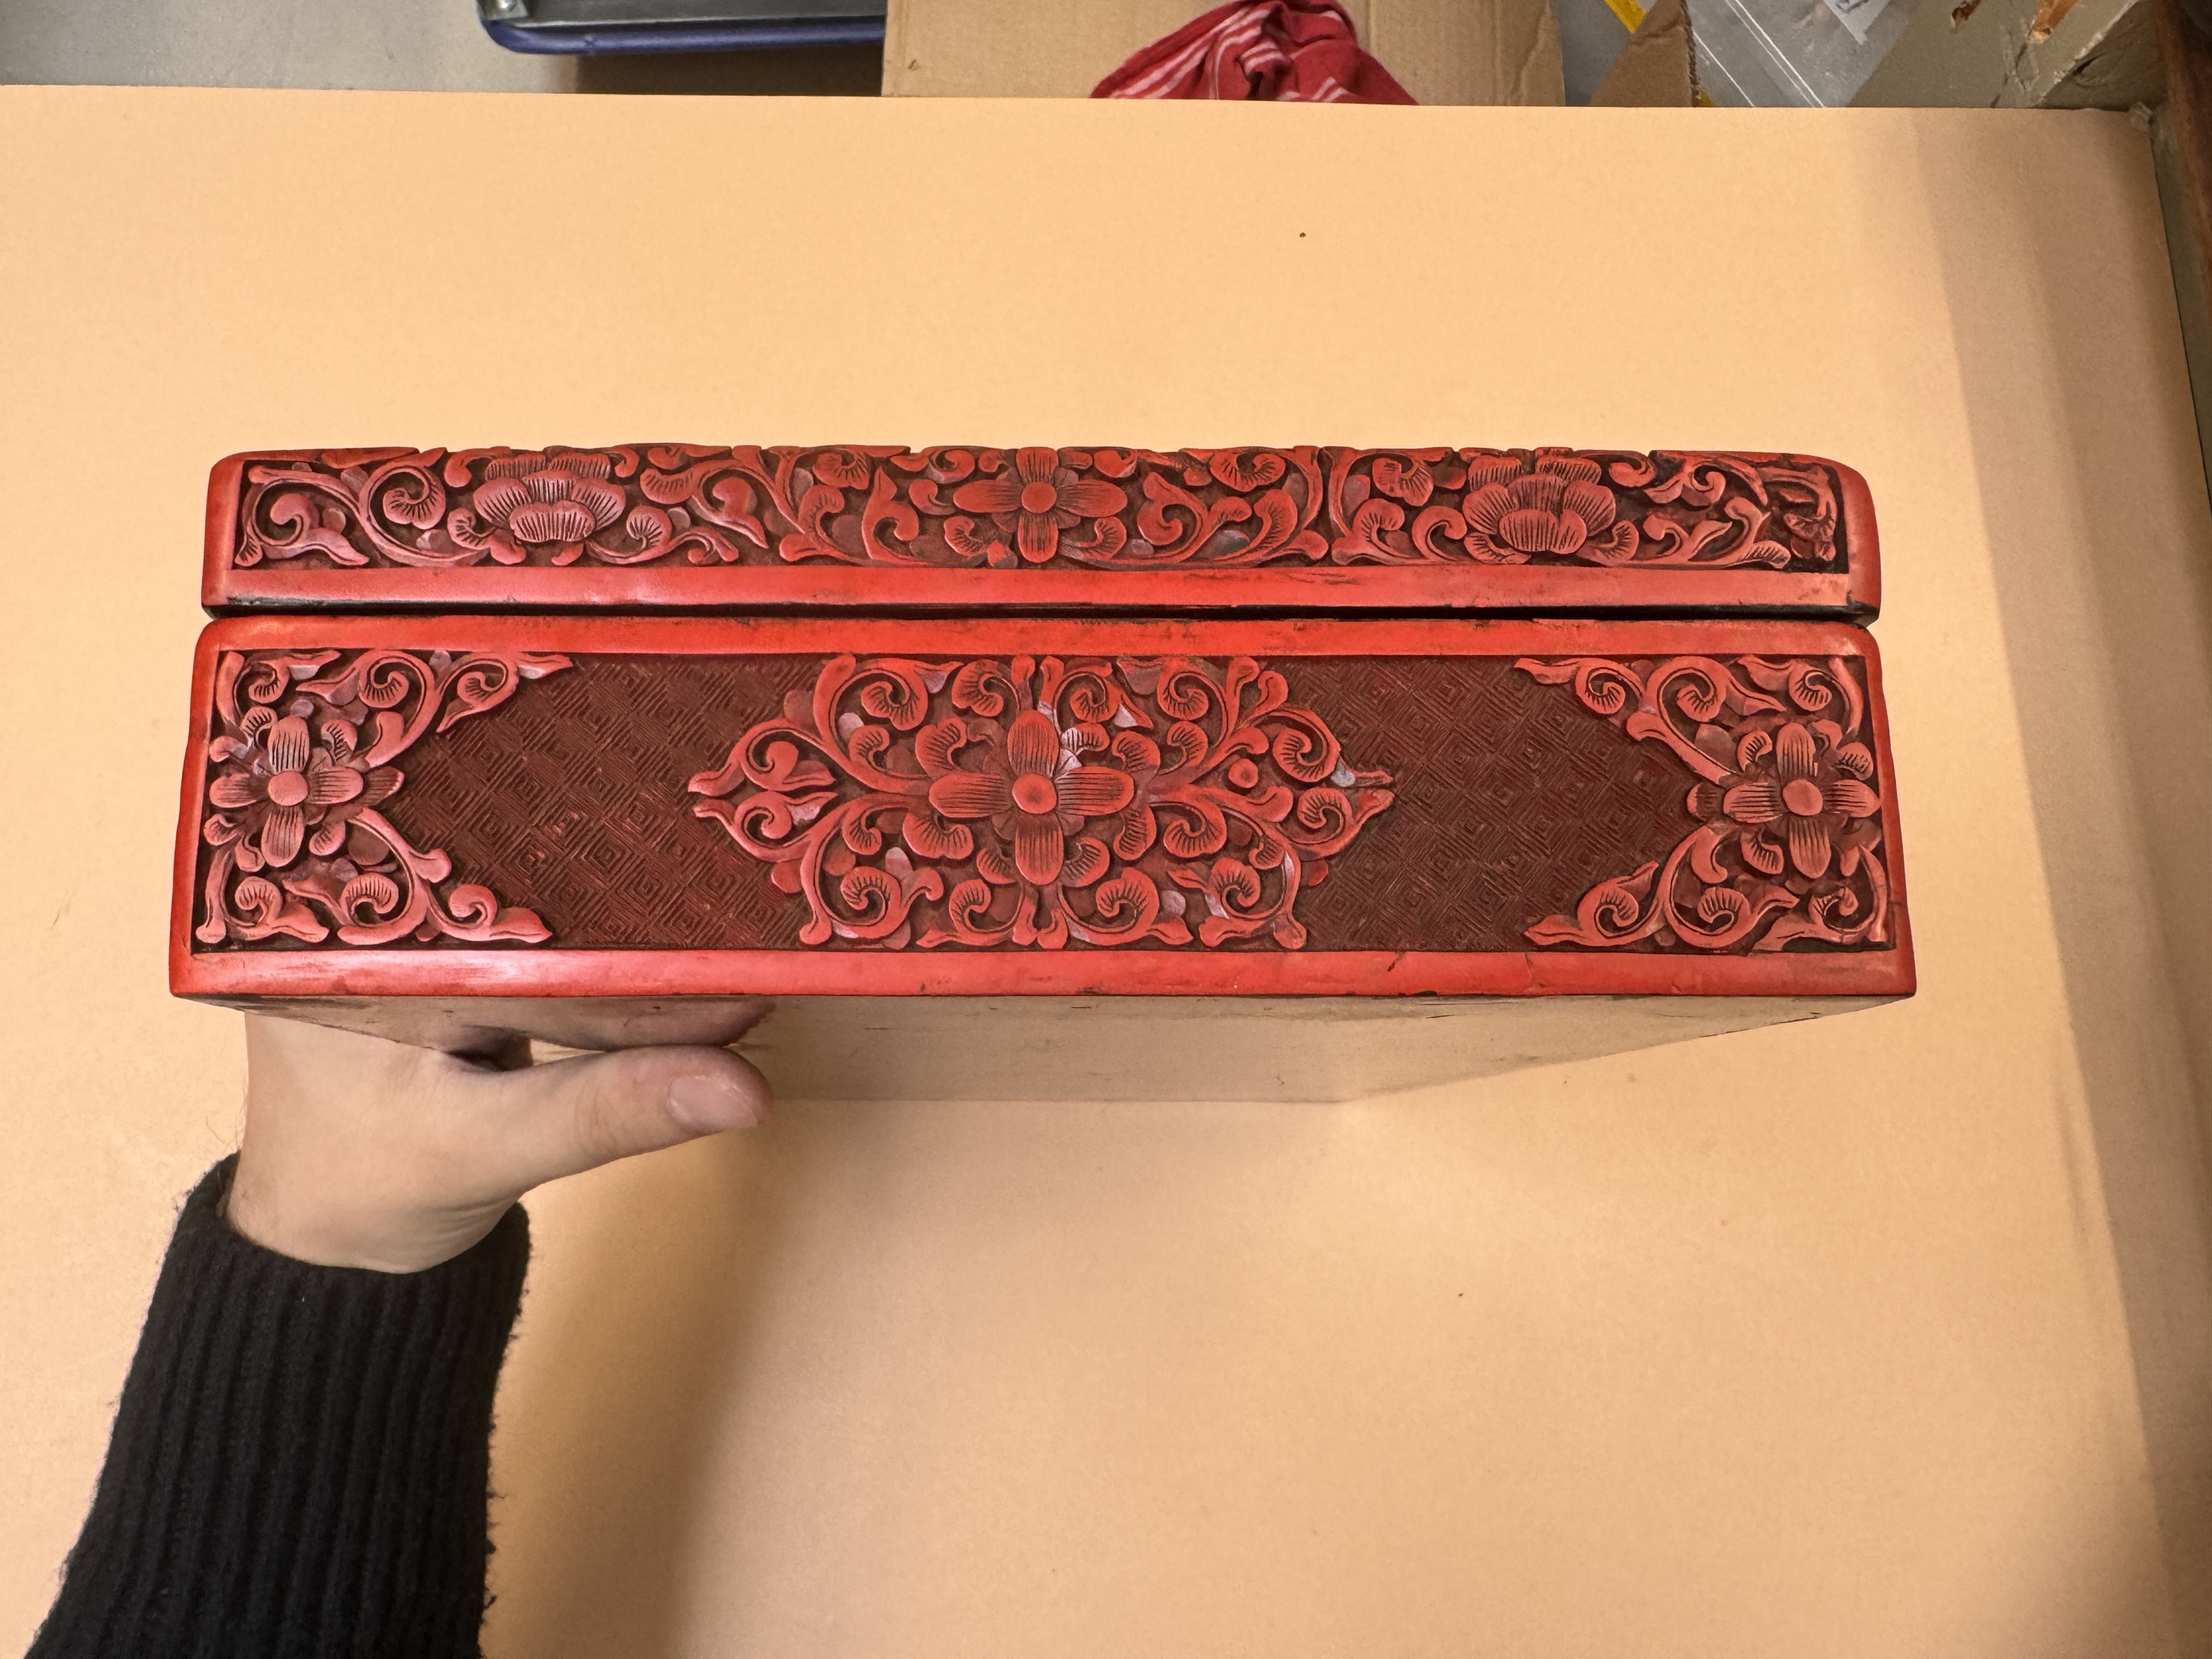 A LARGE AND FINE CHINESE CINNABAR LACQUER 'FIGURAL' BOX AND COVER 早十九世紀 剔紅人物故事圖紋方蓋盒 - Image 42 of 54